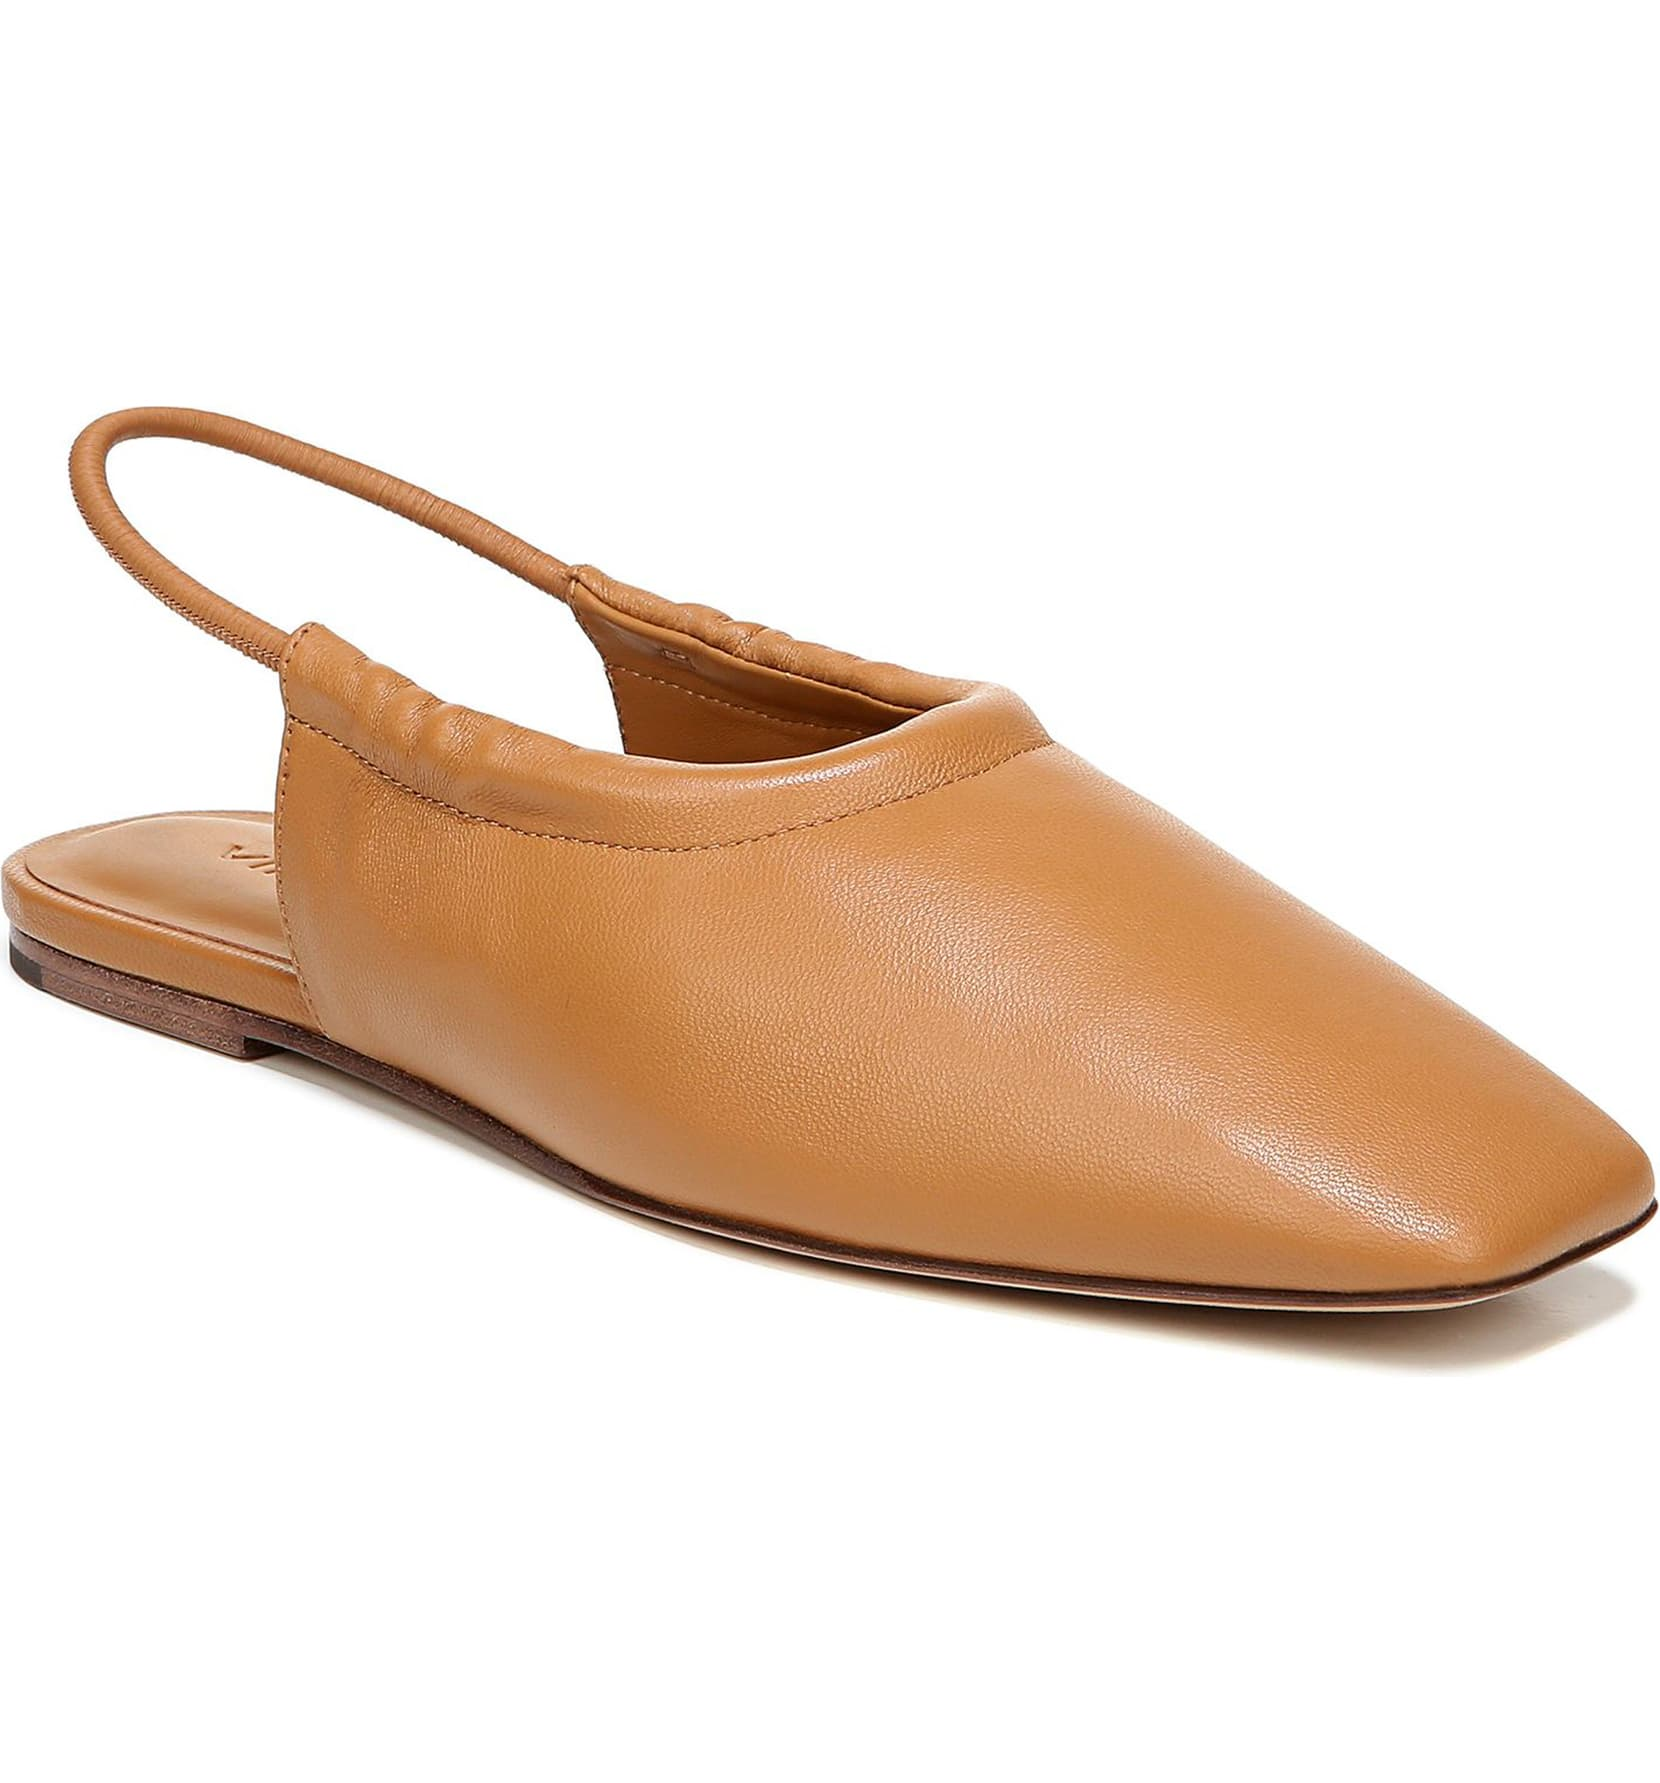 Vince Leather Slingback Flats - Brown Flats, Shoes - WVN252350